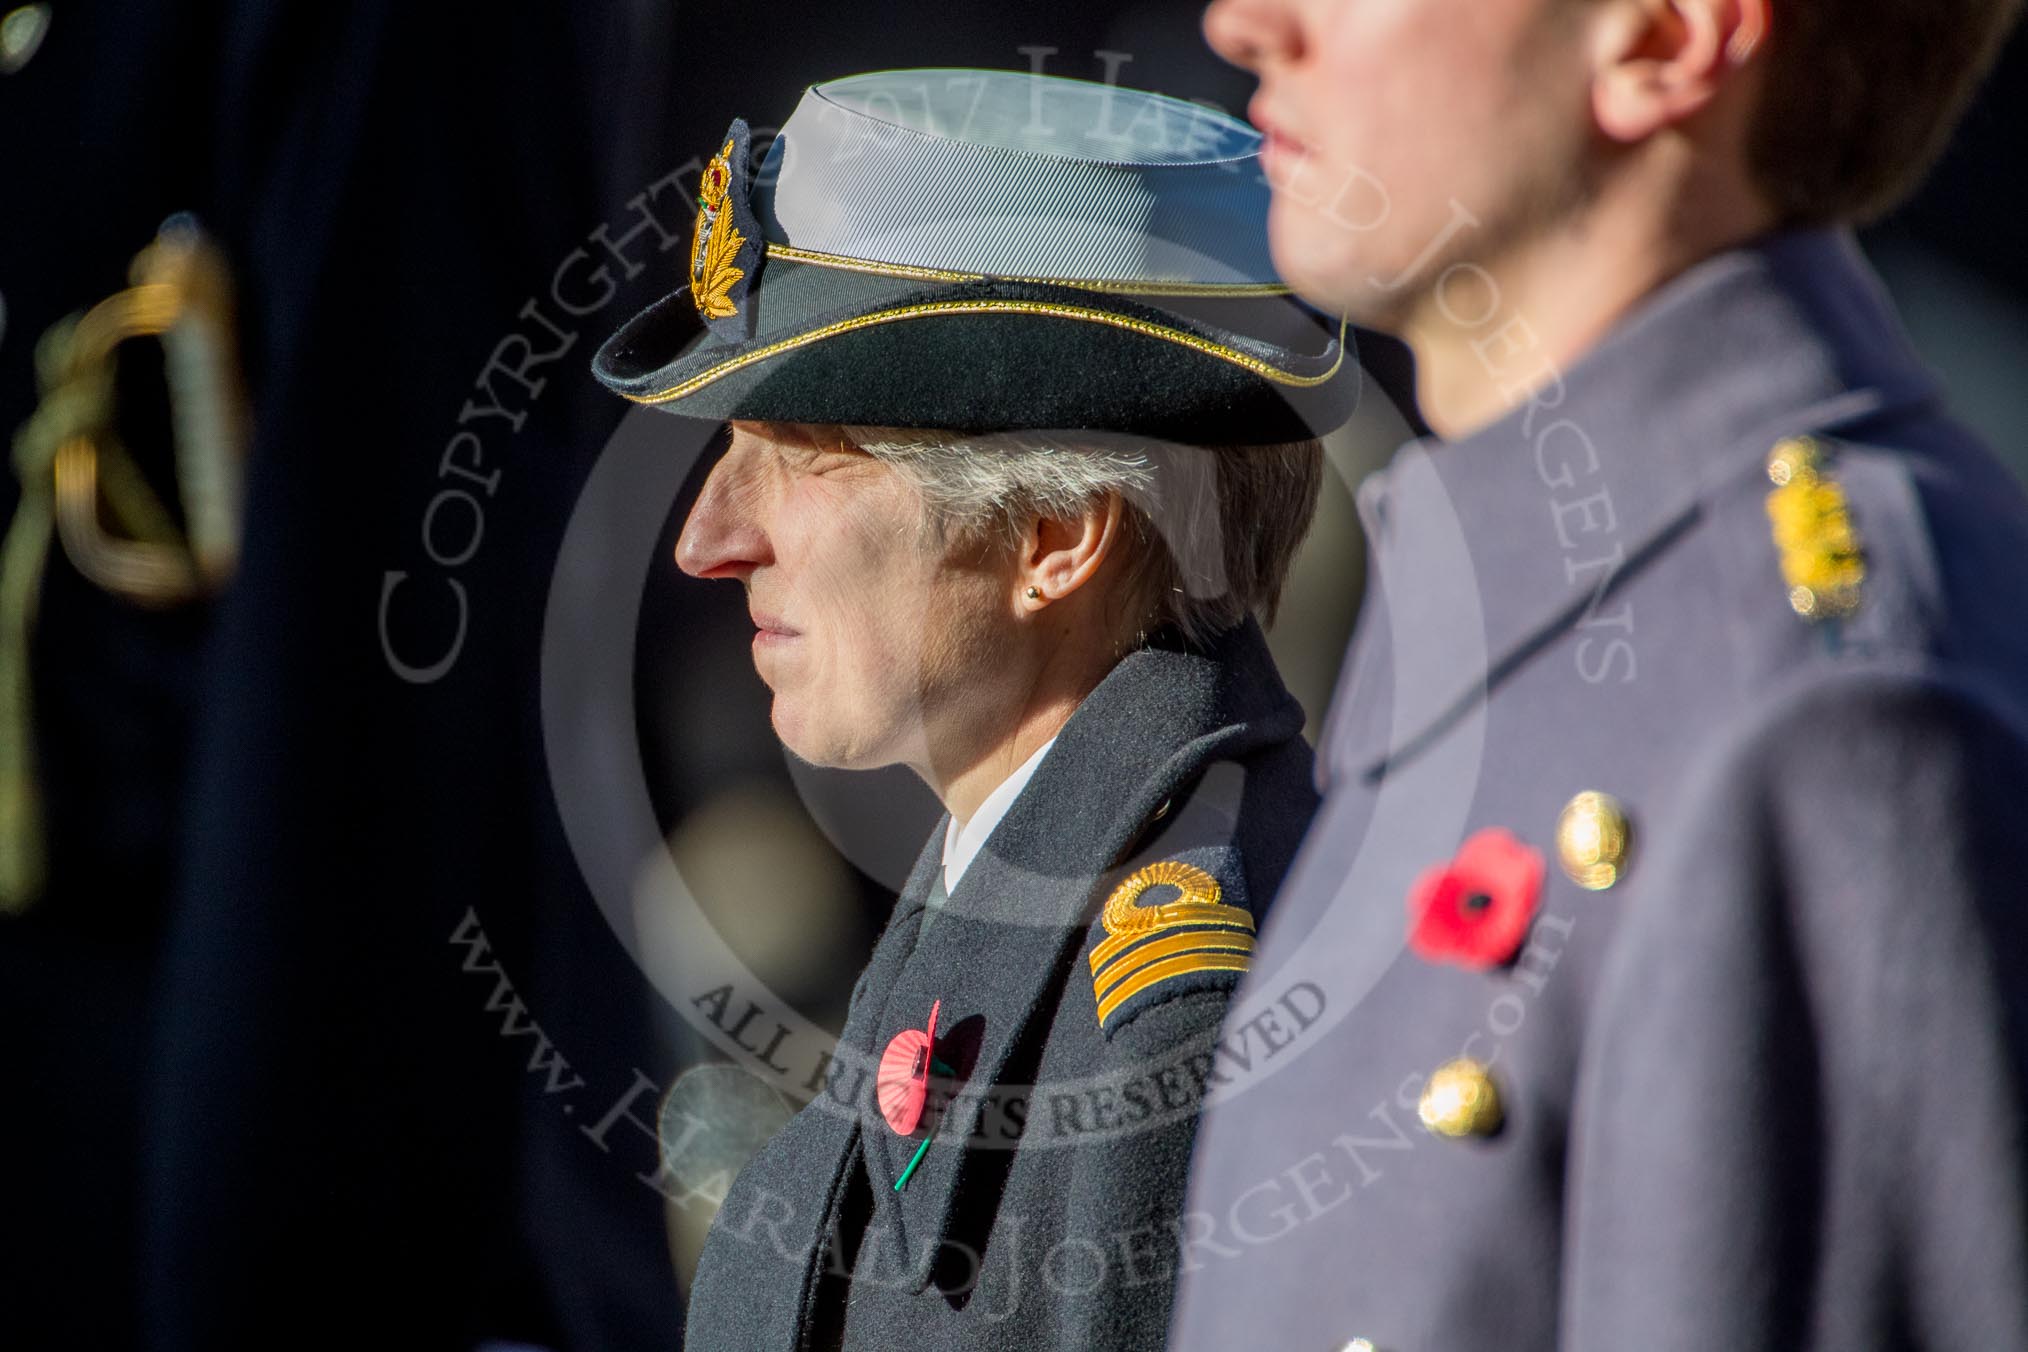 Commander Anne Sullivan, Royal Navy, Equerry to HRH The Princess Royal during the Remembrance Sunday Cenotaph Ceremony 2018 at Horse Guards Parade, Westminster, London, 11 November 2018, 11:17.